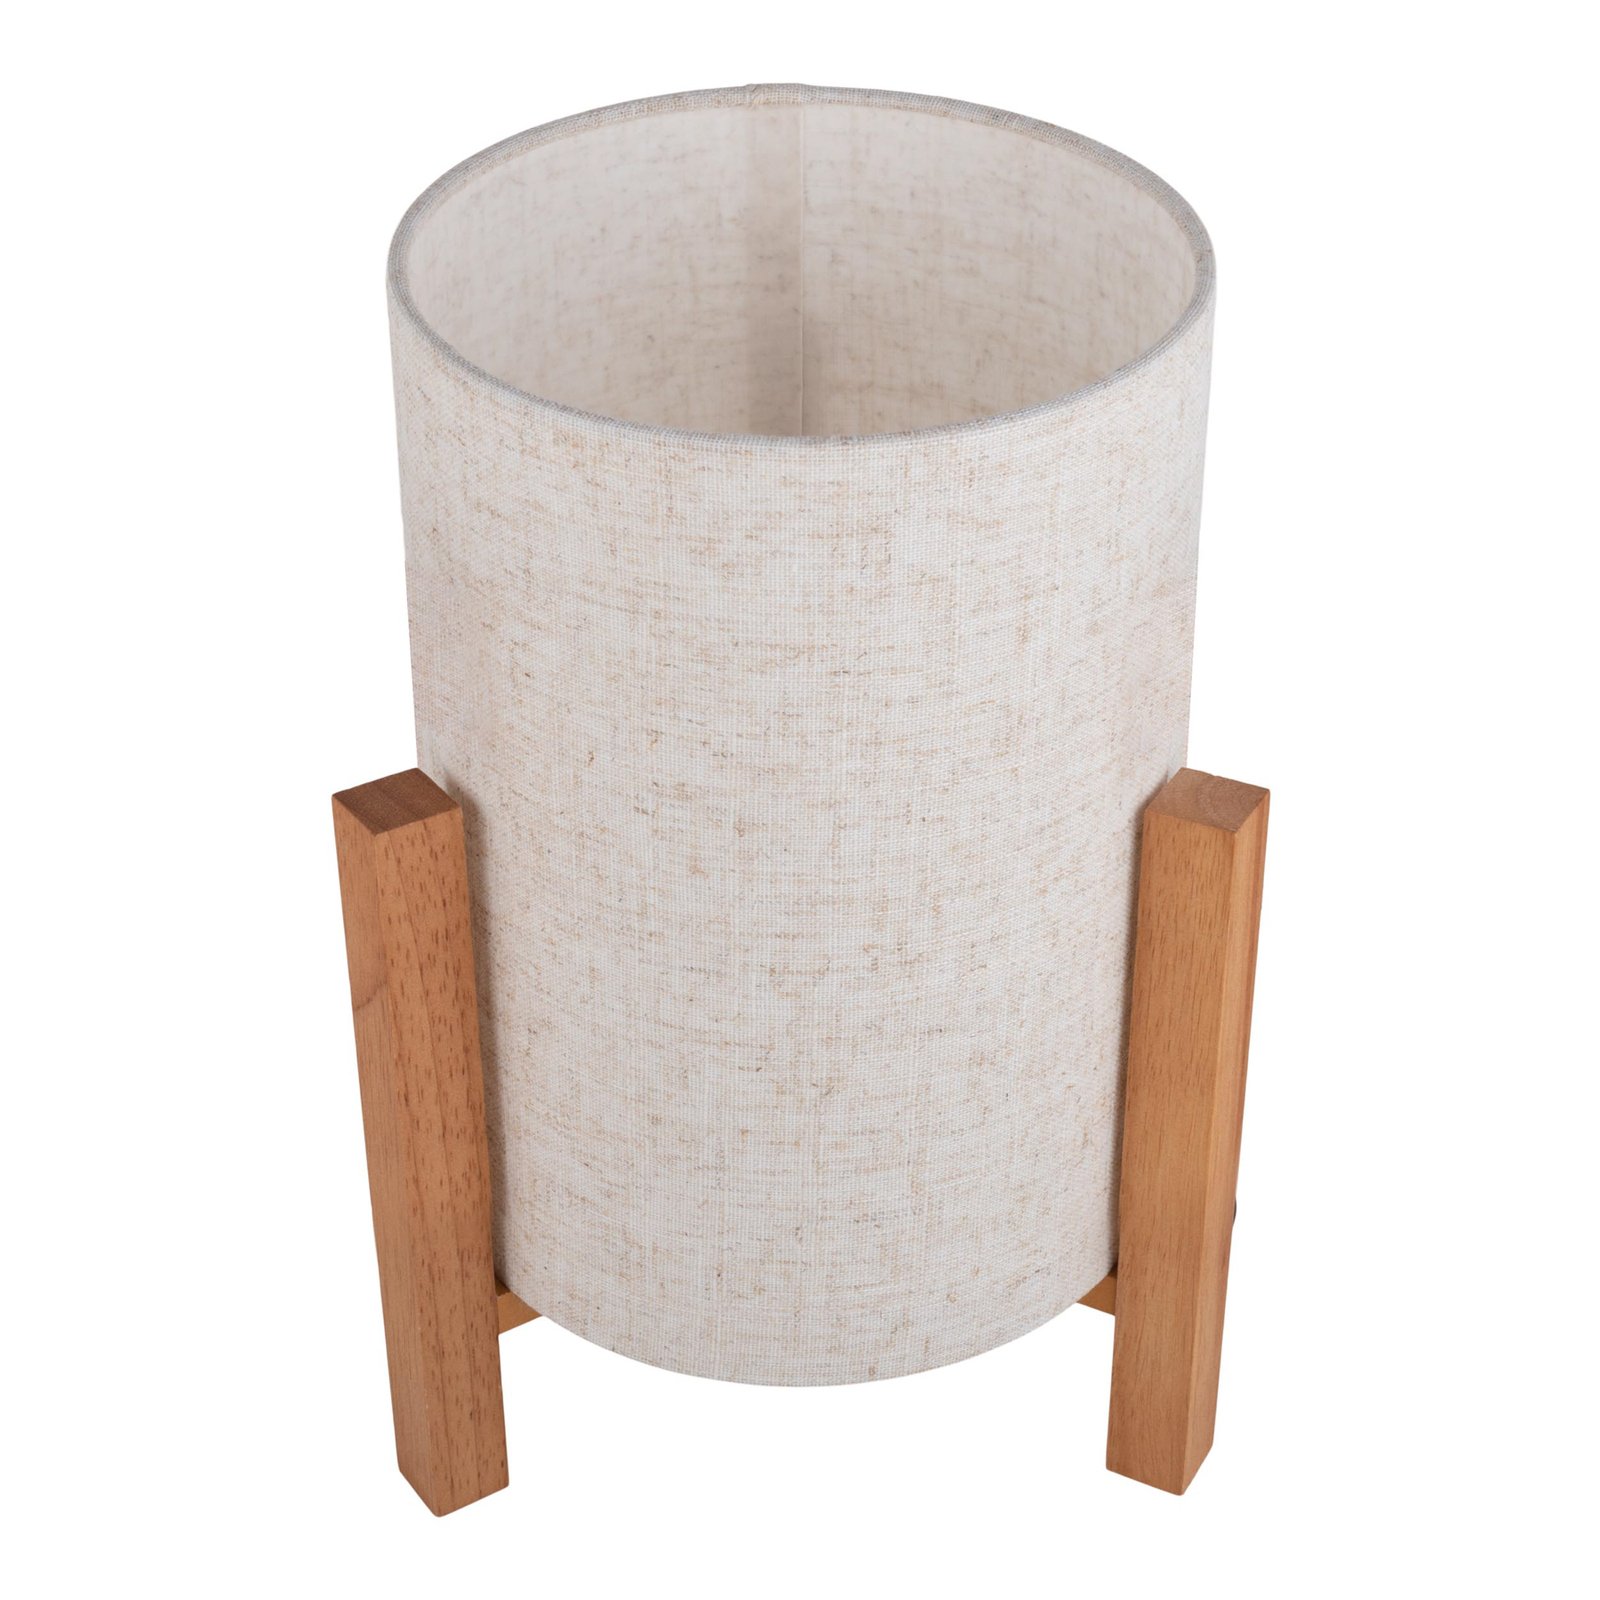 Table lamp 3193, wood, linen textile, height 32cm